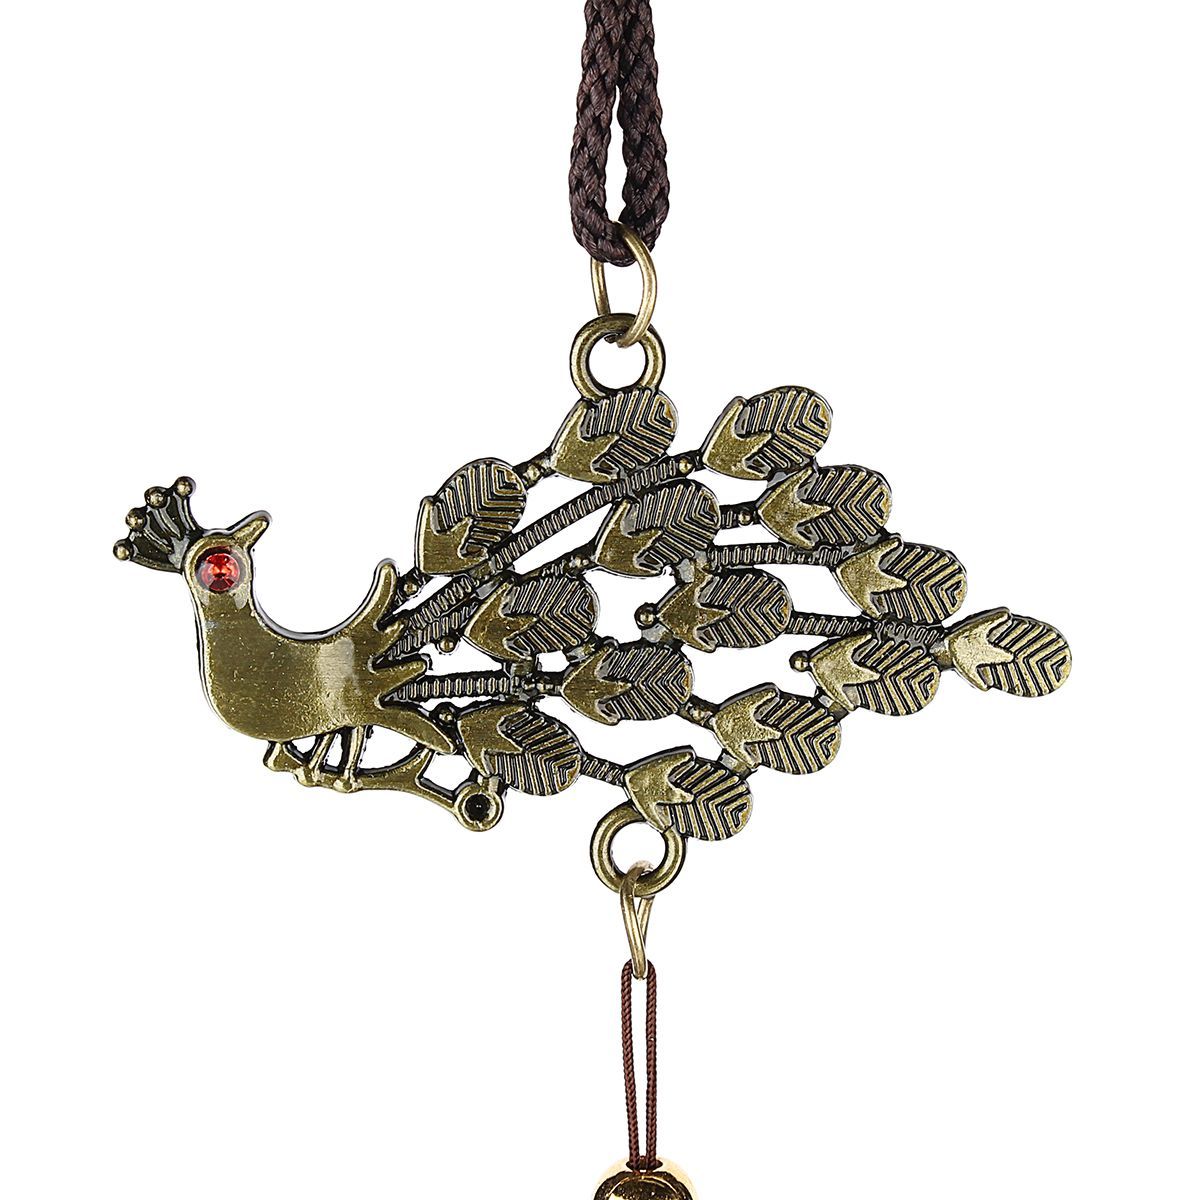 Wind-Chimes-Bells-Lucky-Fish-Elephant-Garden-Outdoor-Windows-Hanging-Ornament-Decorations-1536812